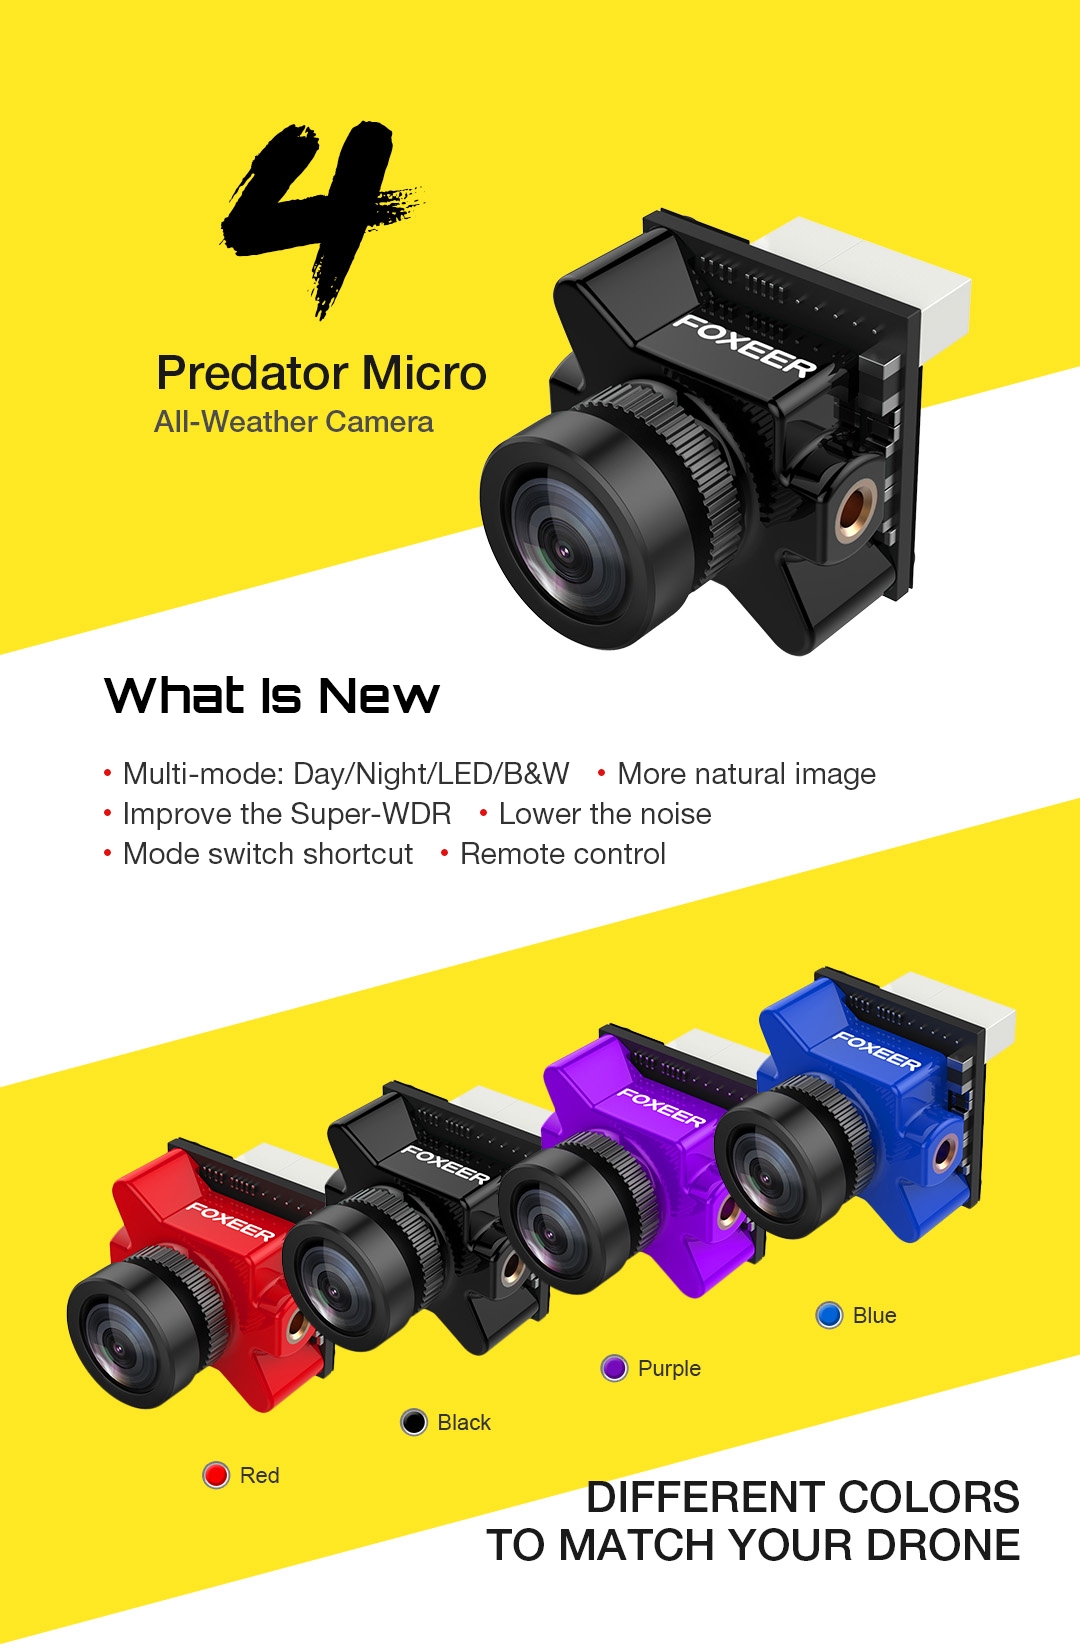 Foxeer Micro Predator 4 Super WDR 4ms Latency 1000TVL FPV Racing Camera w/ Connector + Foxeer ClearTX 2 5.8G 48CH 25/200/500/800mW Uart Remote Control VTx FPV Transmitter MMCX